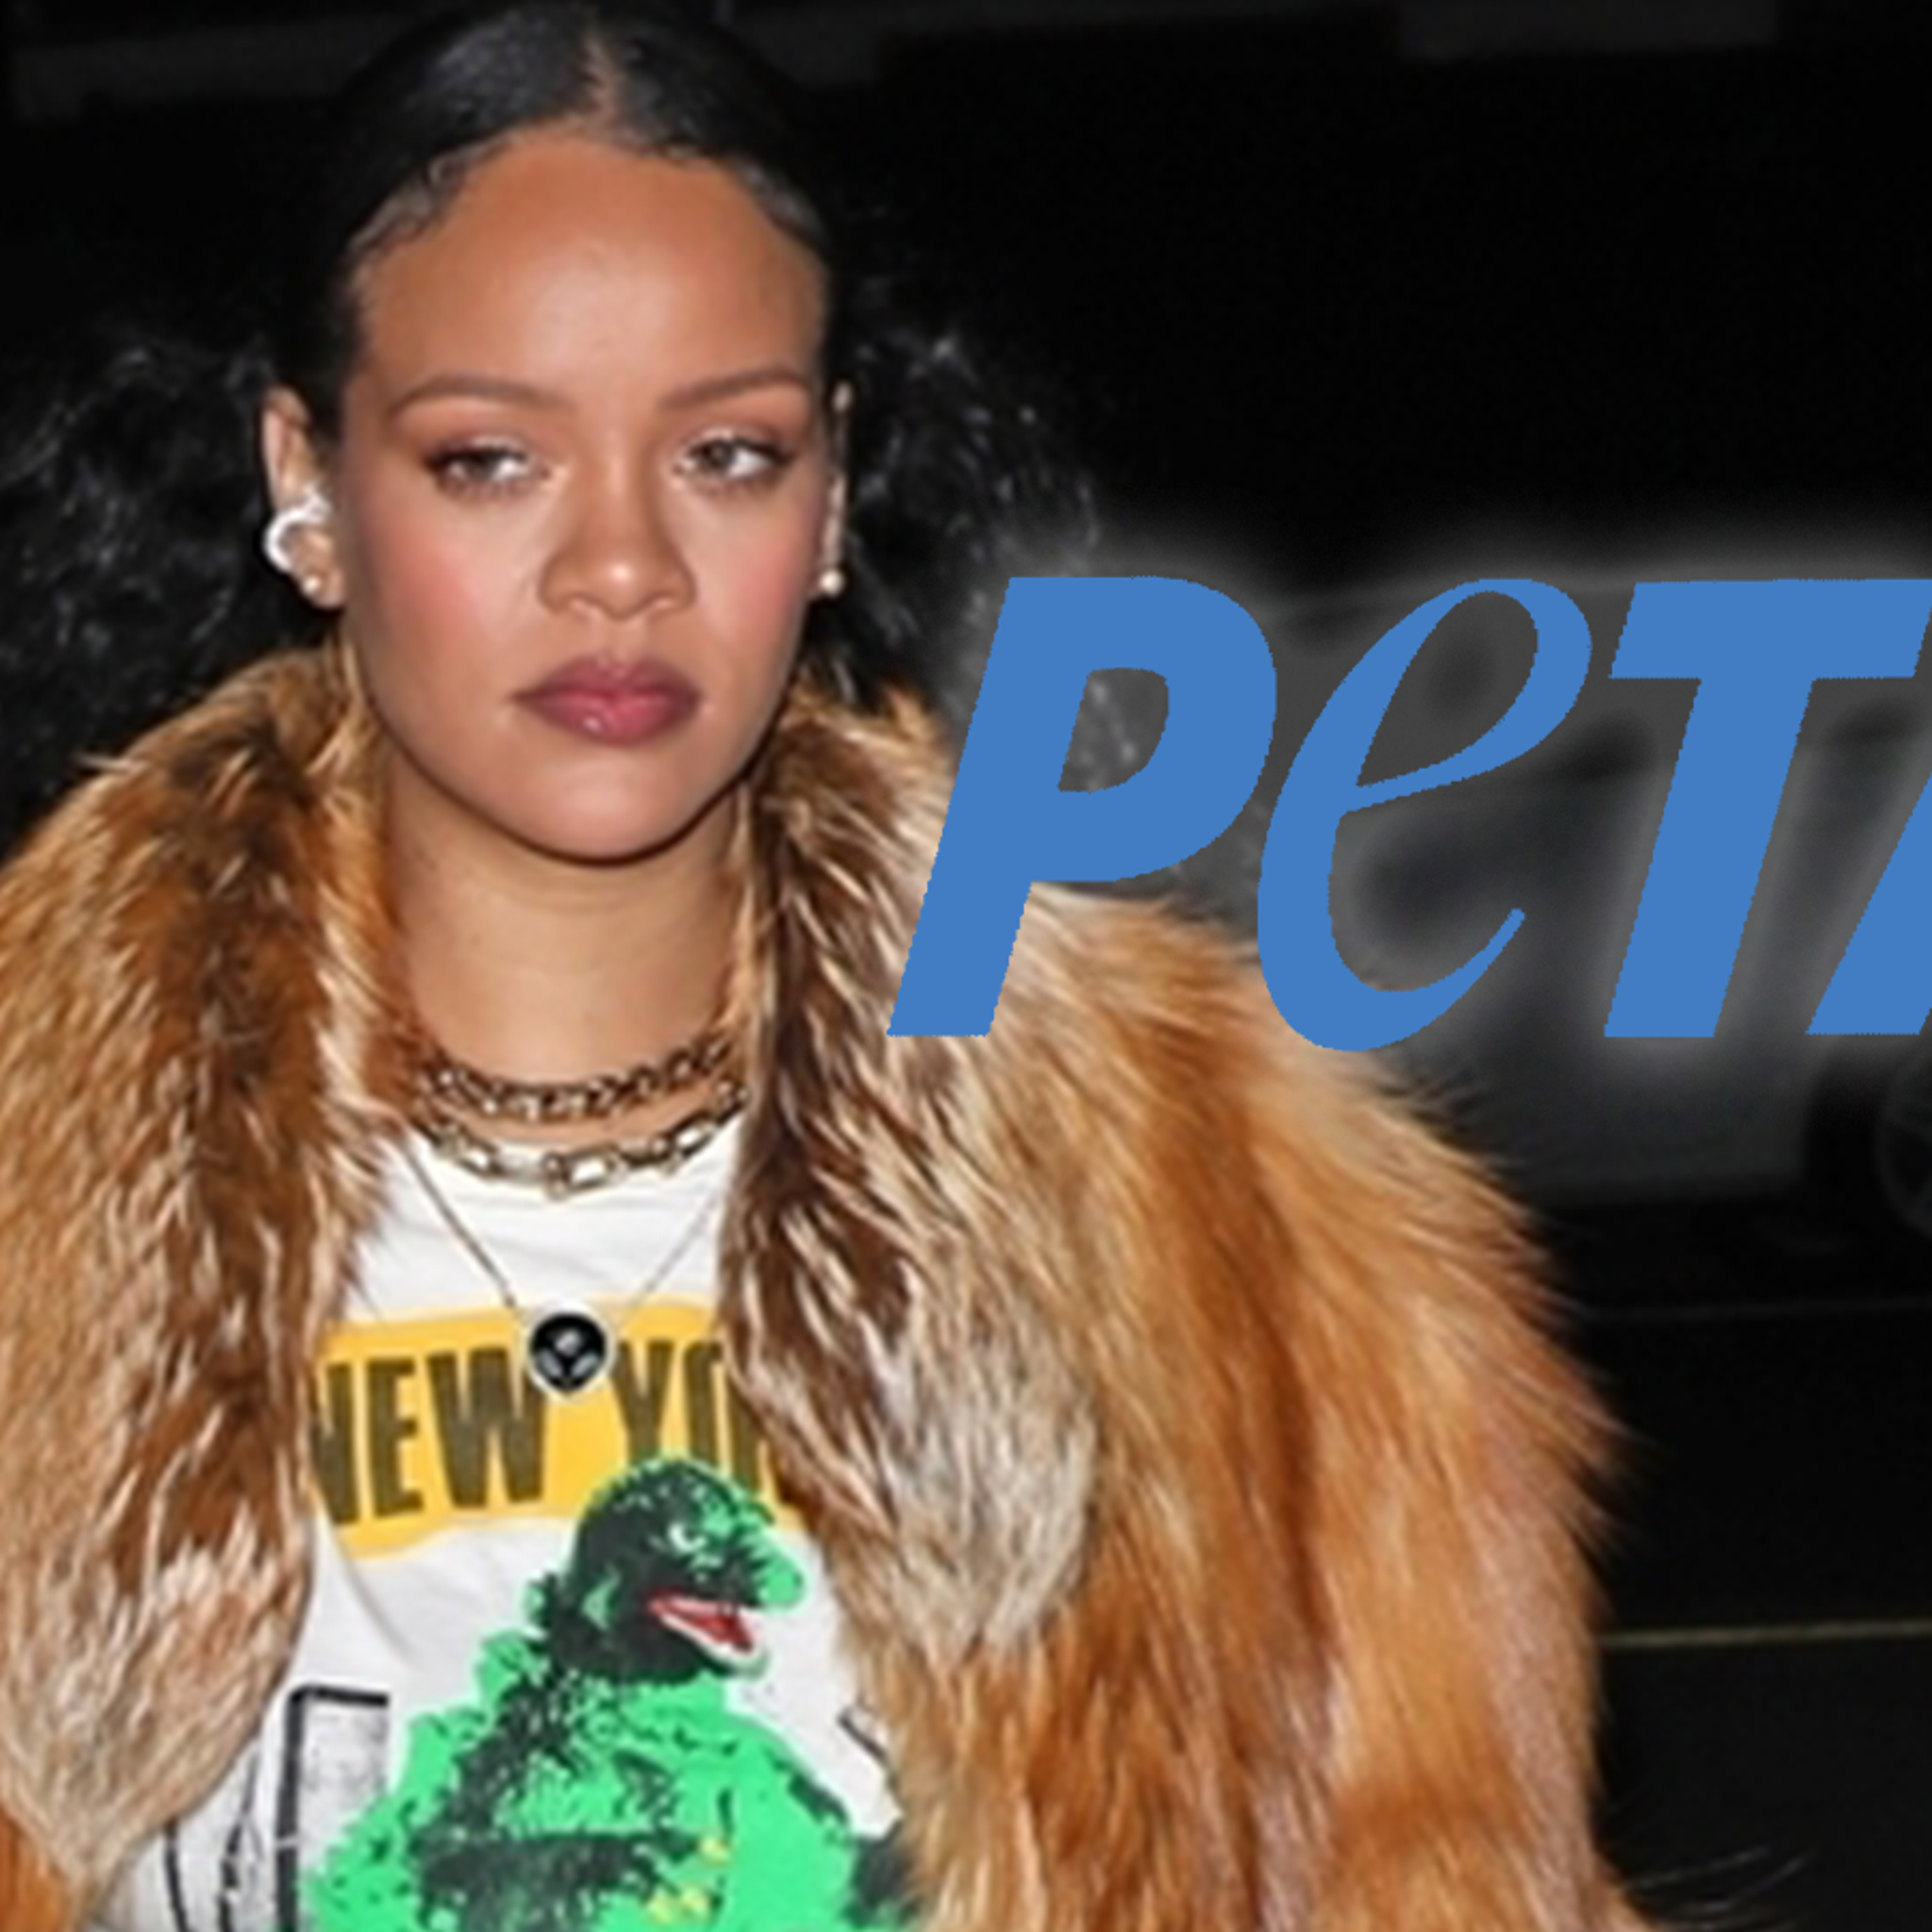 Rihanna Wants You To Buy Her Clothes, and Her Message